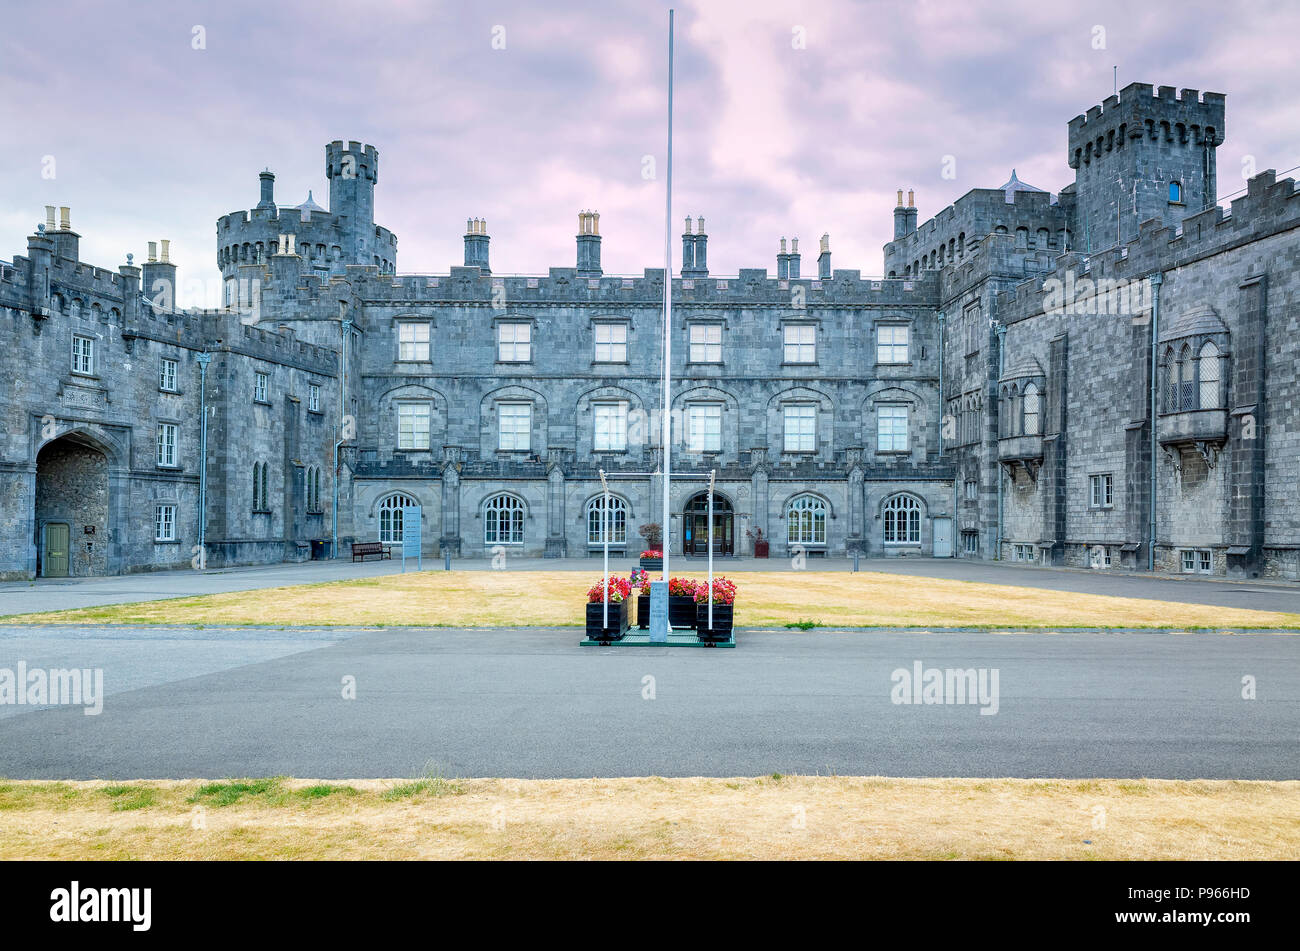 Front view of the medieval castle of Kilkenny, Leinster, Republic of Ireland, Europe Stock Photo